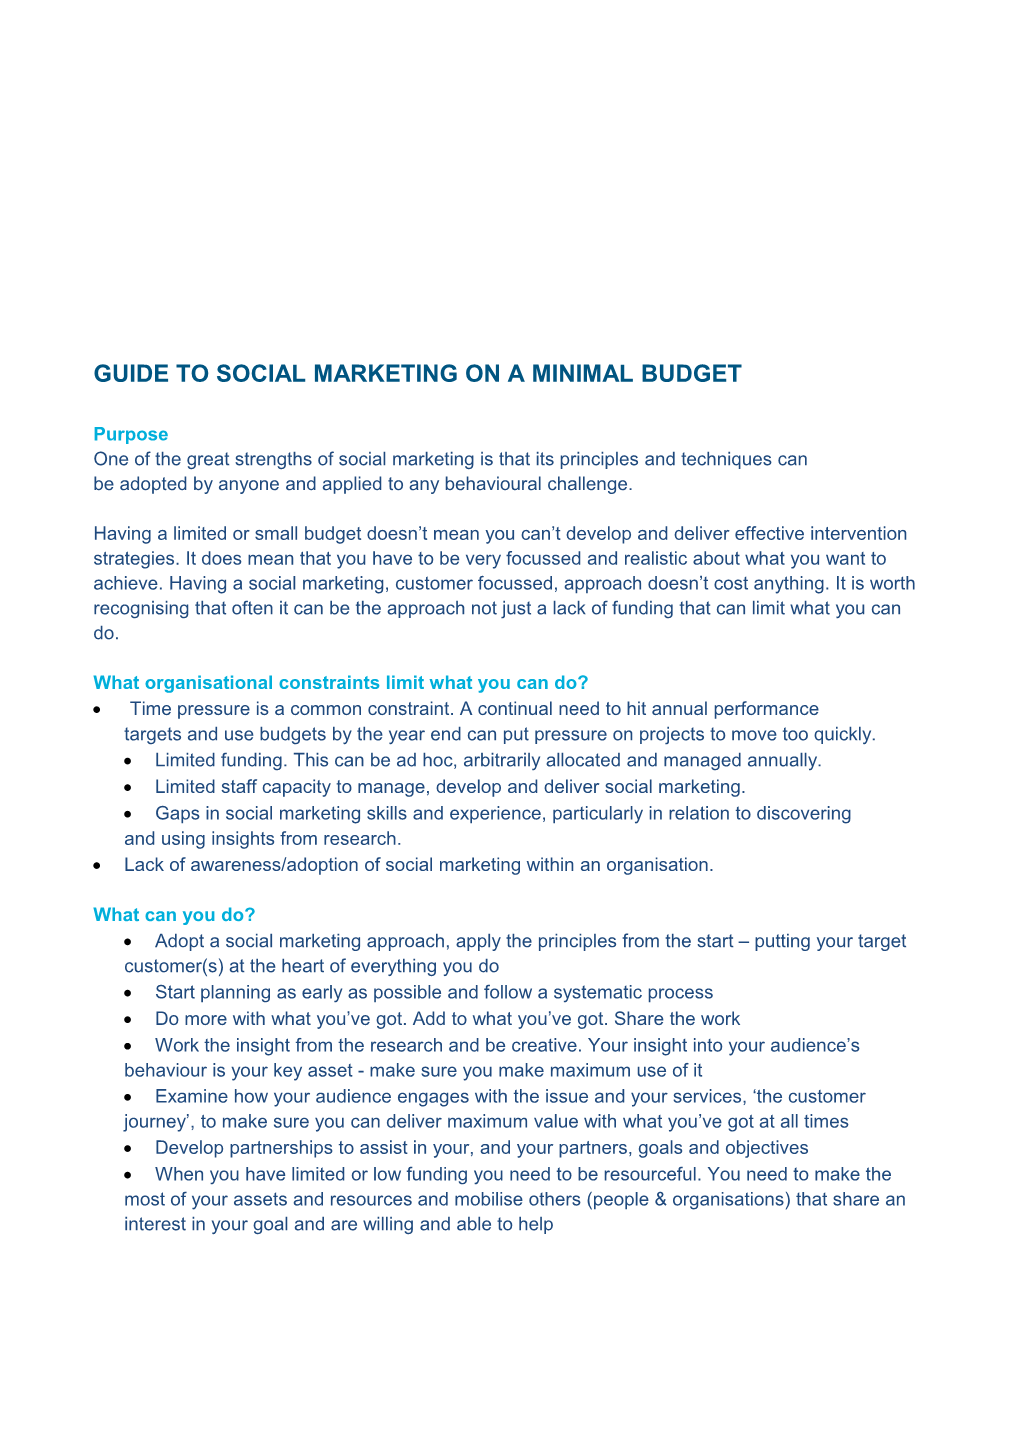 Guide to Social Marketing on a Minimal Budget